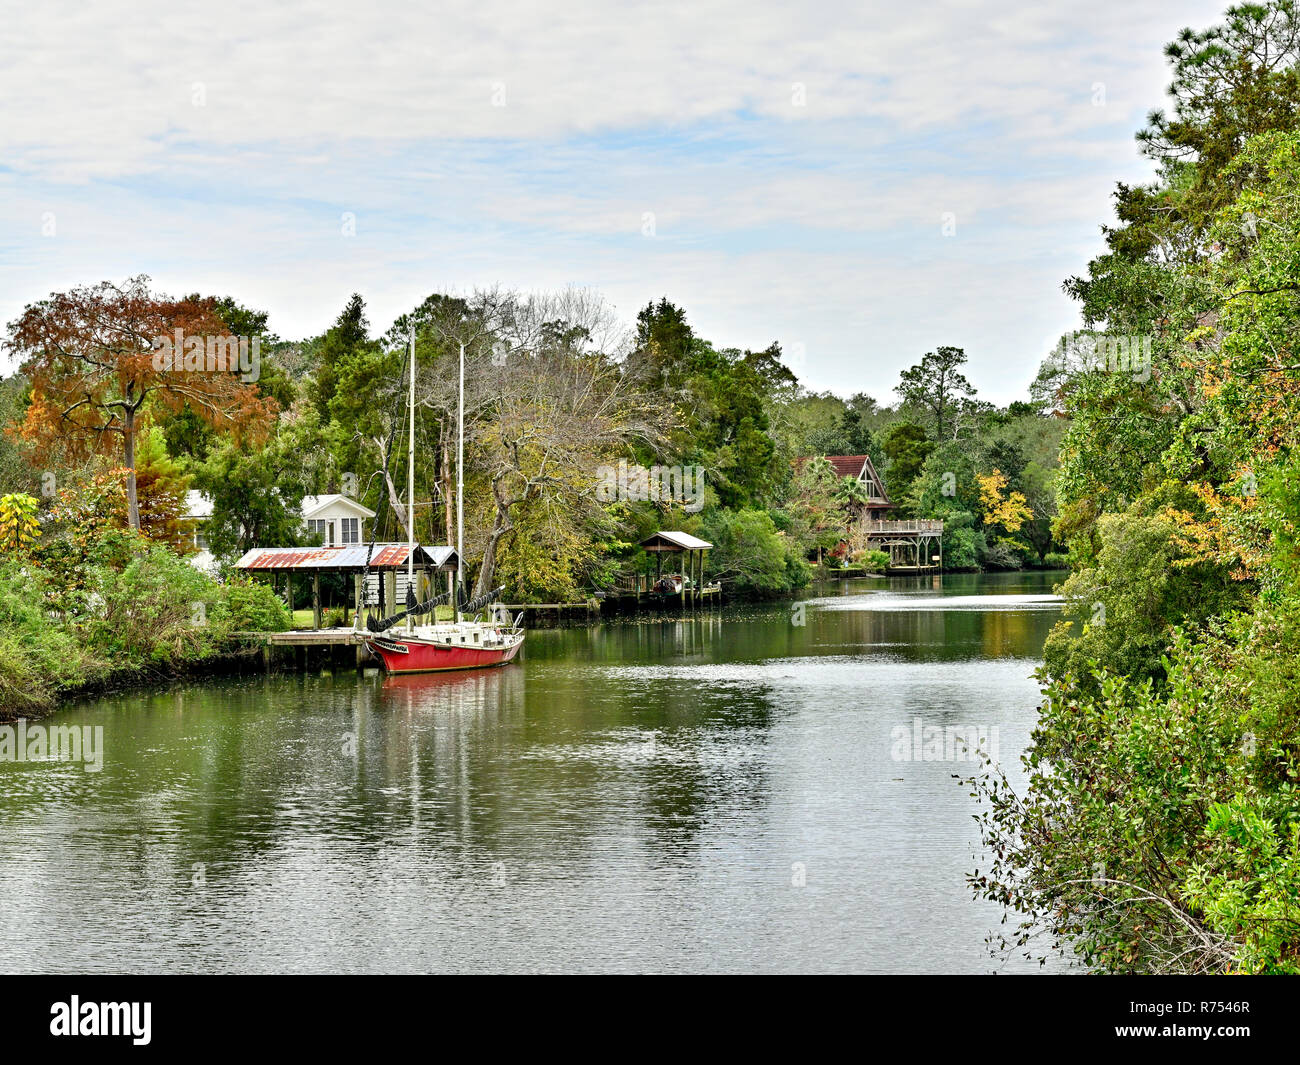 Single red sailboat tied up to a small dock on the Eslava Branch or bayou in South Alabama, USA. Stock Photo